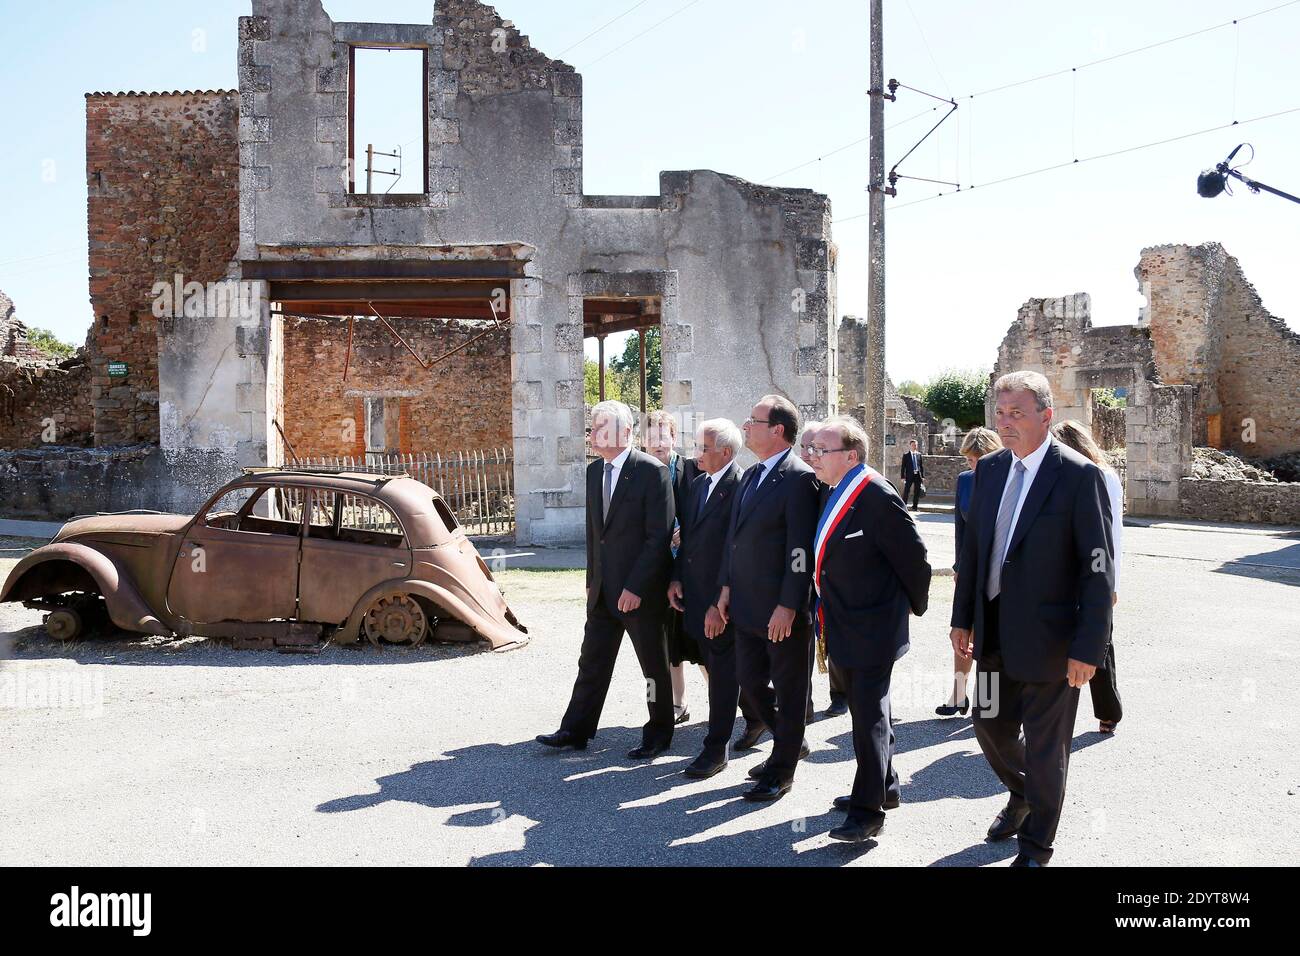 French President Francois Hollande and German President Joachim Gauck are pictured at the memorial site in Oradour-sur-Glane, France on September 4, 2013. A unit of SS officers murdered 642 citizens of the town during World War II in June 1944. The German President is on a three-day visit to France. Photo by Patrick Bernard/ABACAPRESS.COM Stock Photo